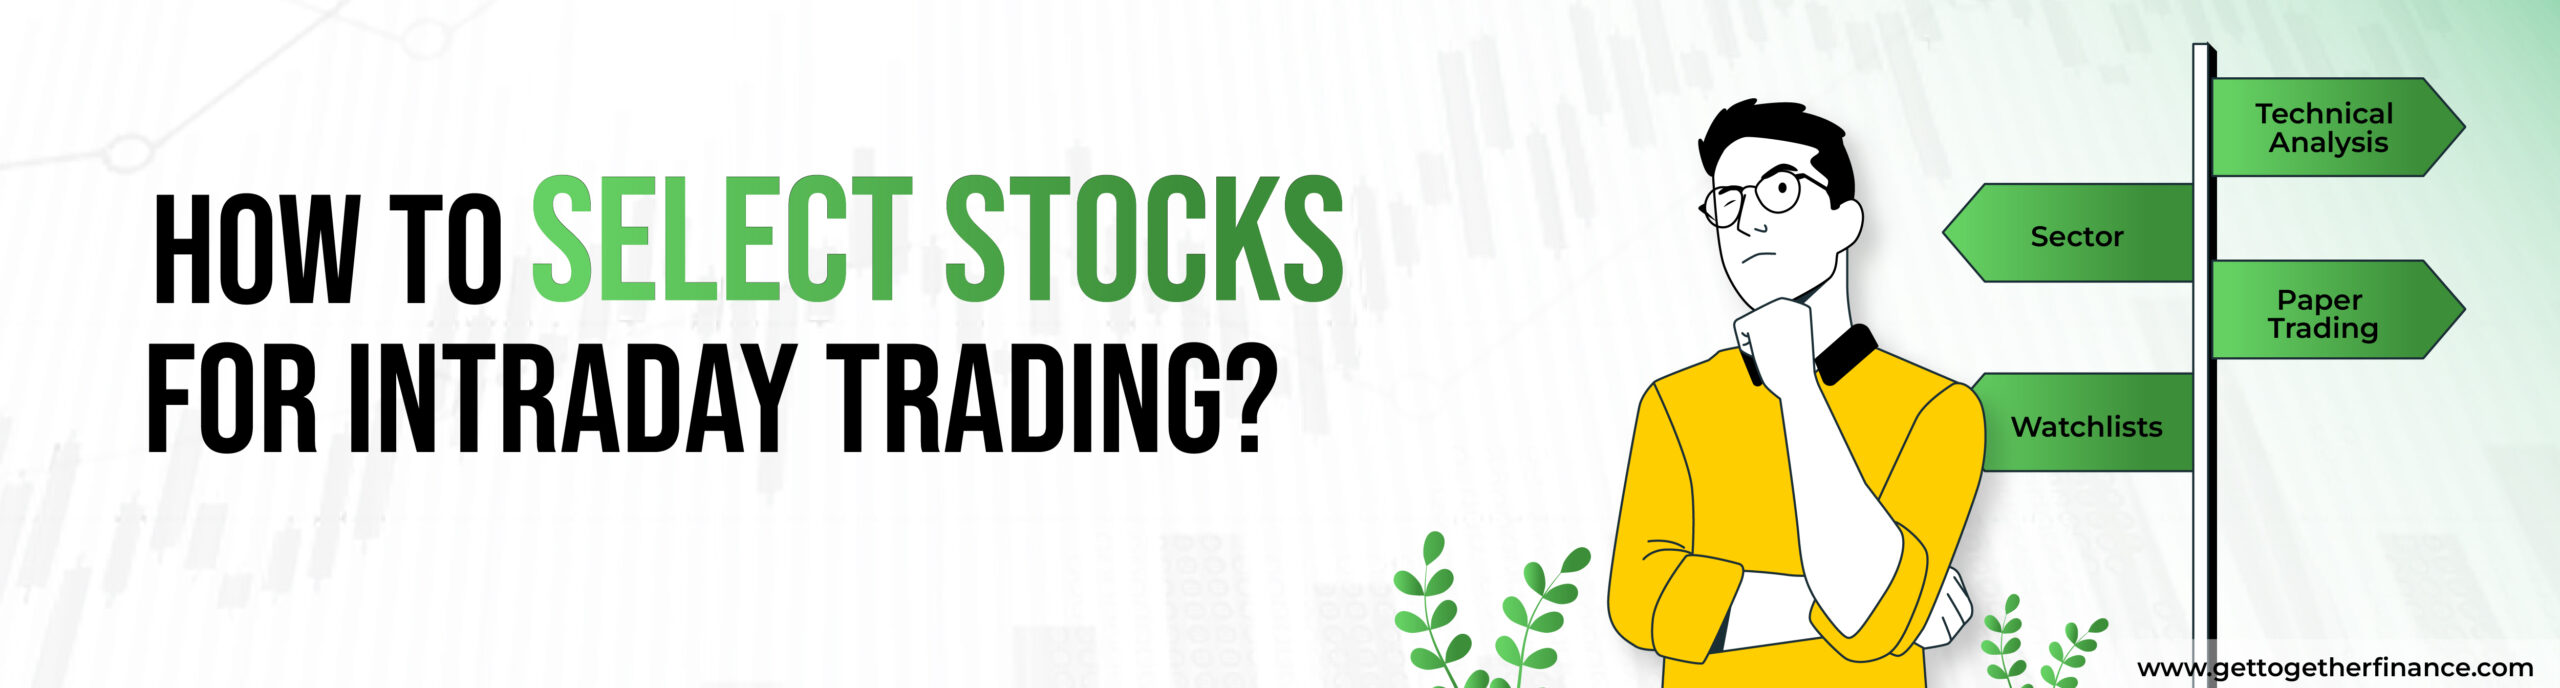 how to select stocks for intraday trading